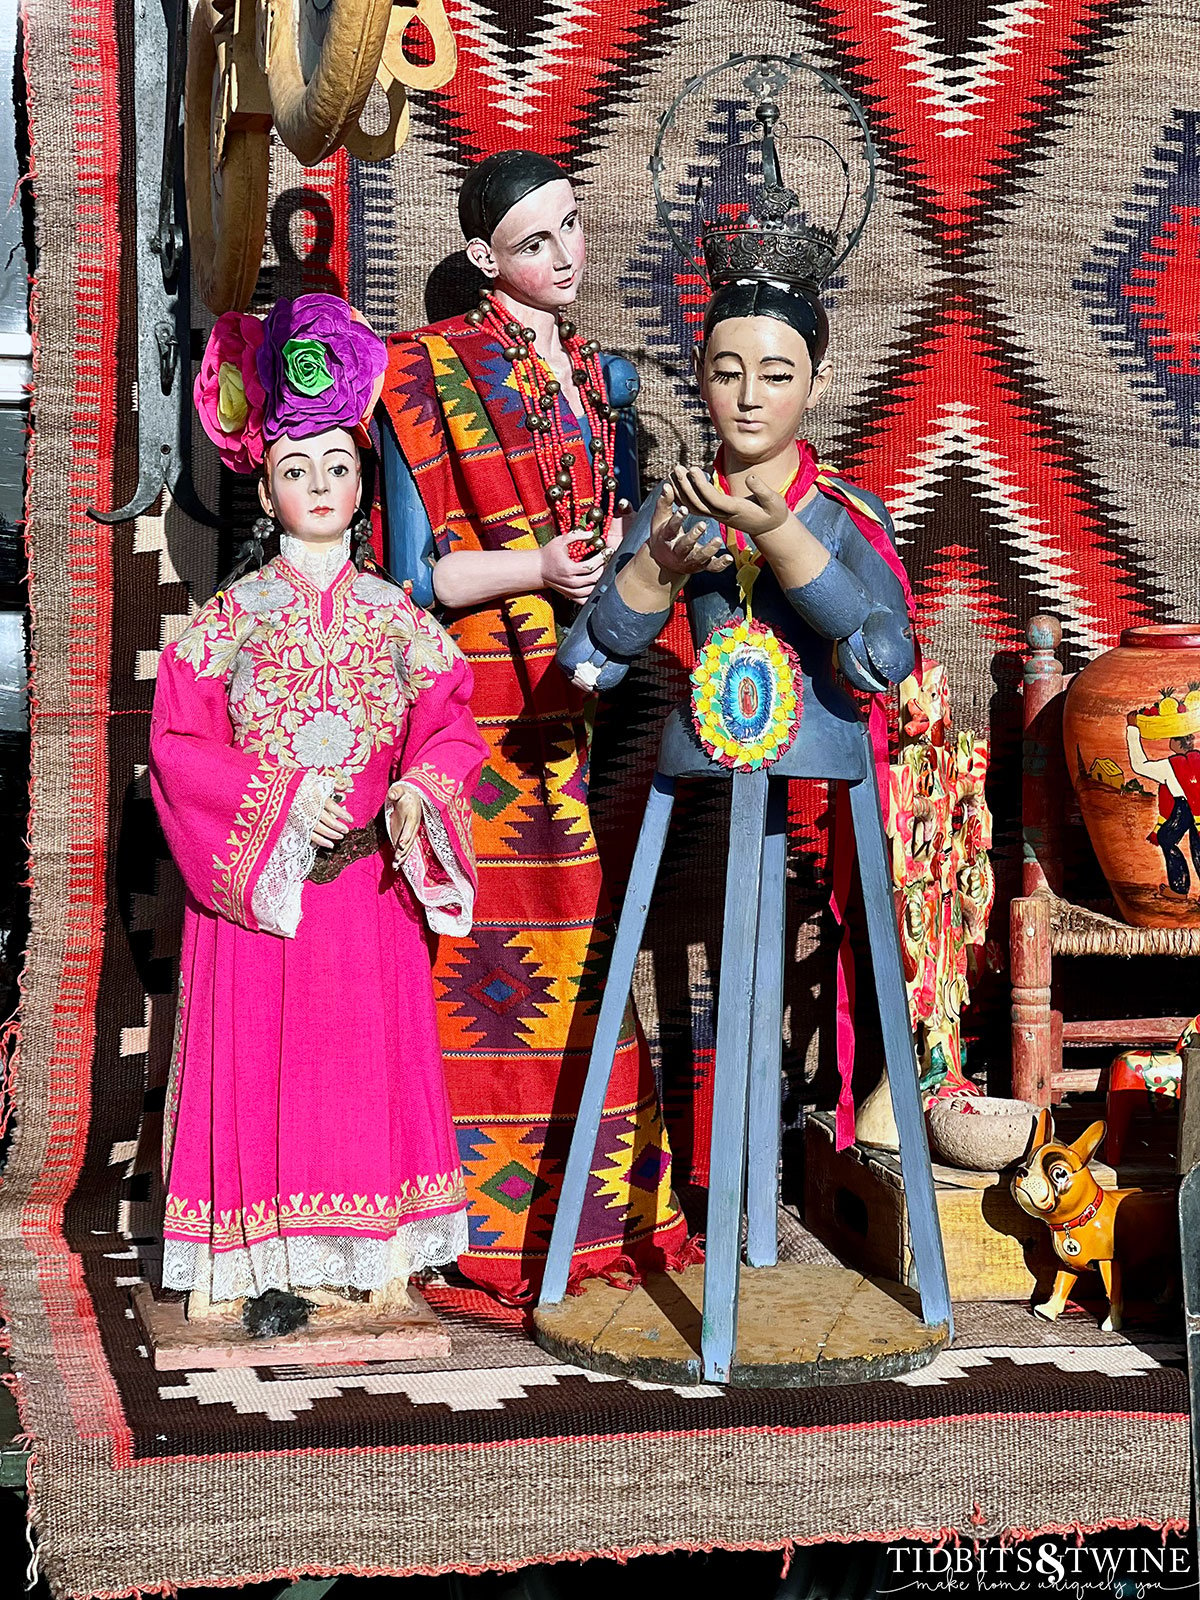 three religious santos dolls in blue and pink on table with kilm rug hanging in background